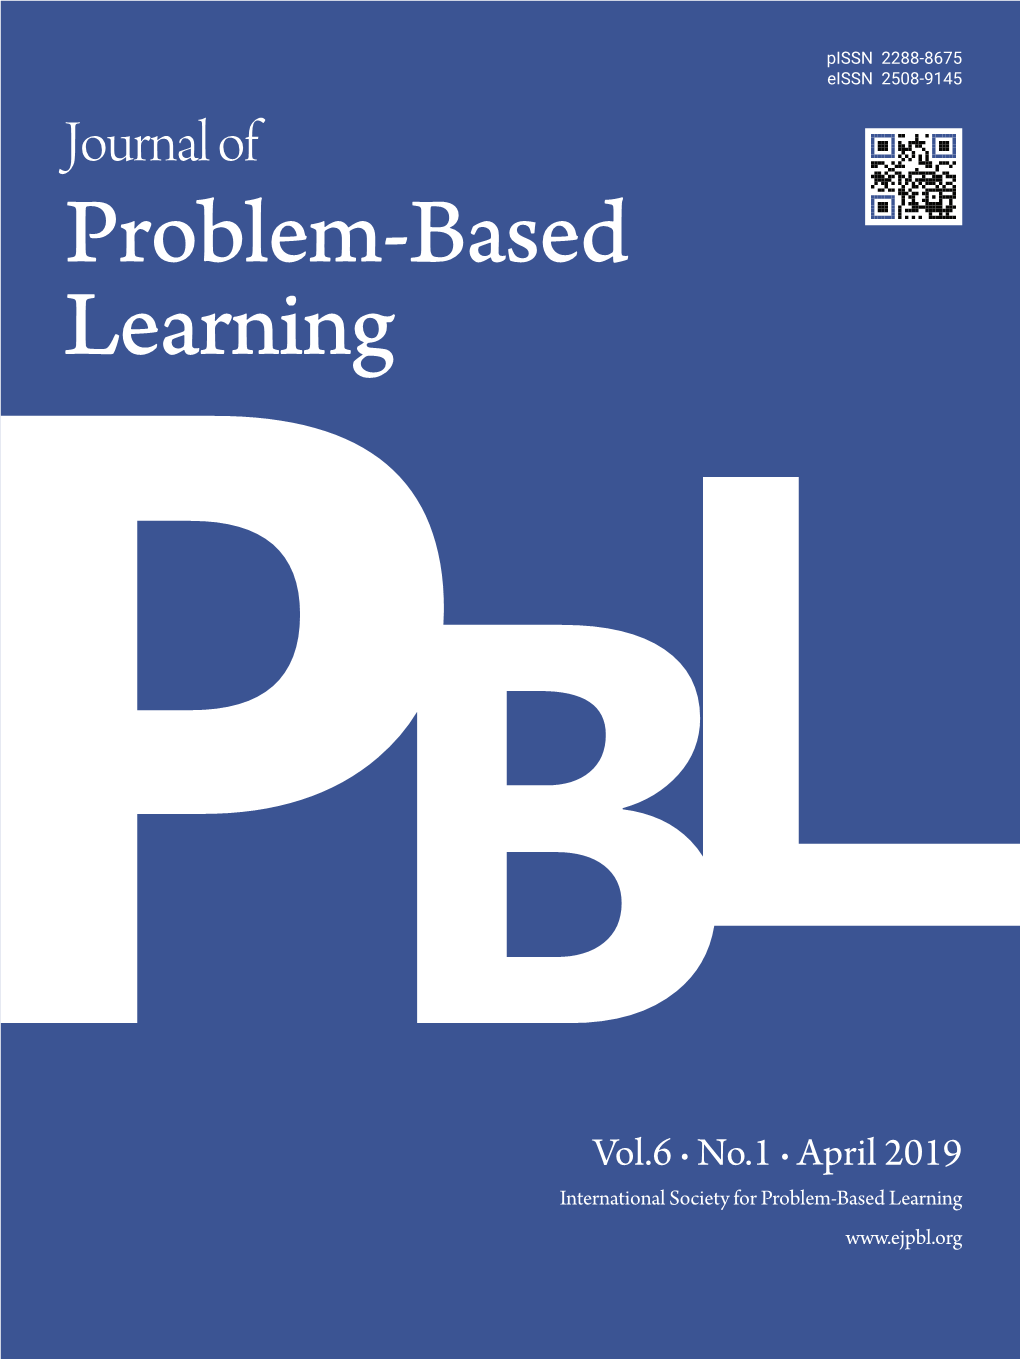 No.1 · April 2019 International Society for Problem-Based Learning Pissn 2288-8675 Eissn 2508-9145